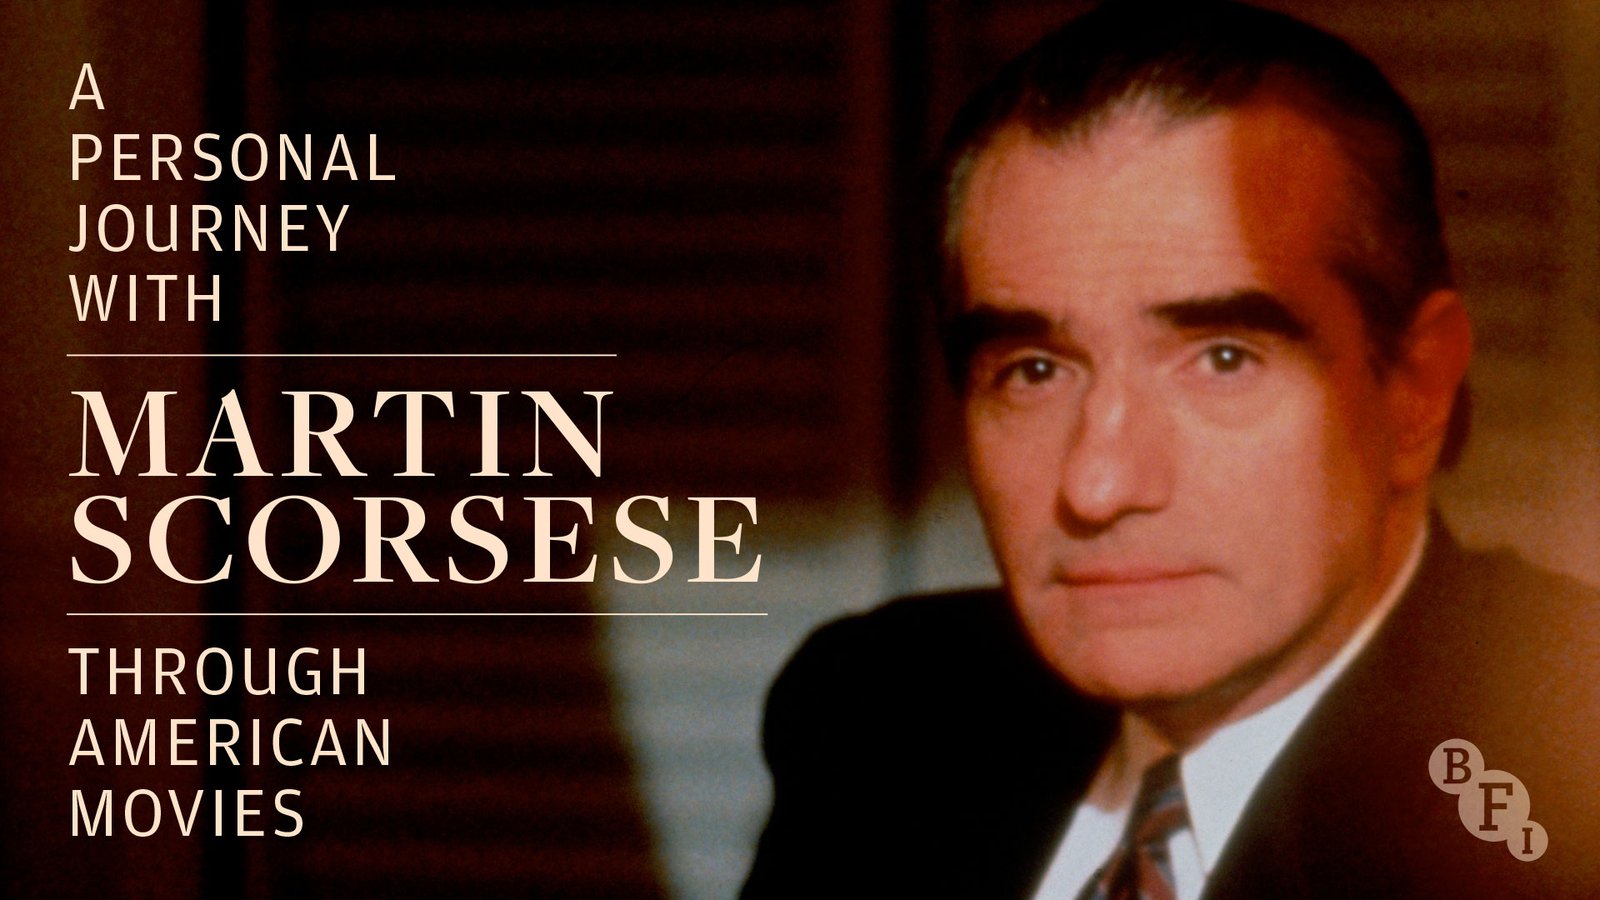 A Personal Journey with Martin Scorsese through American Movies